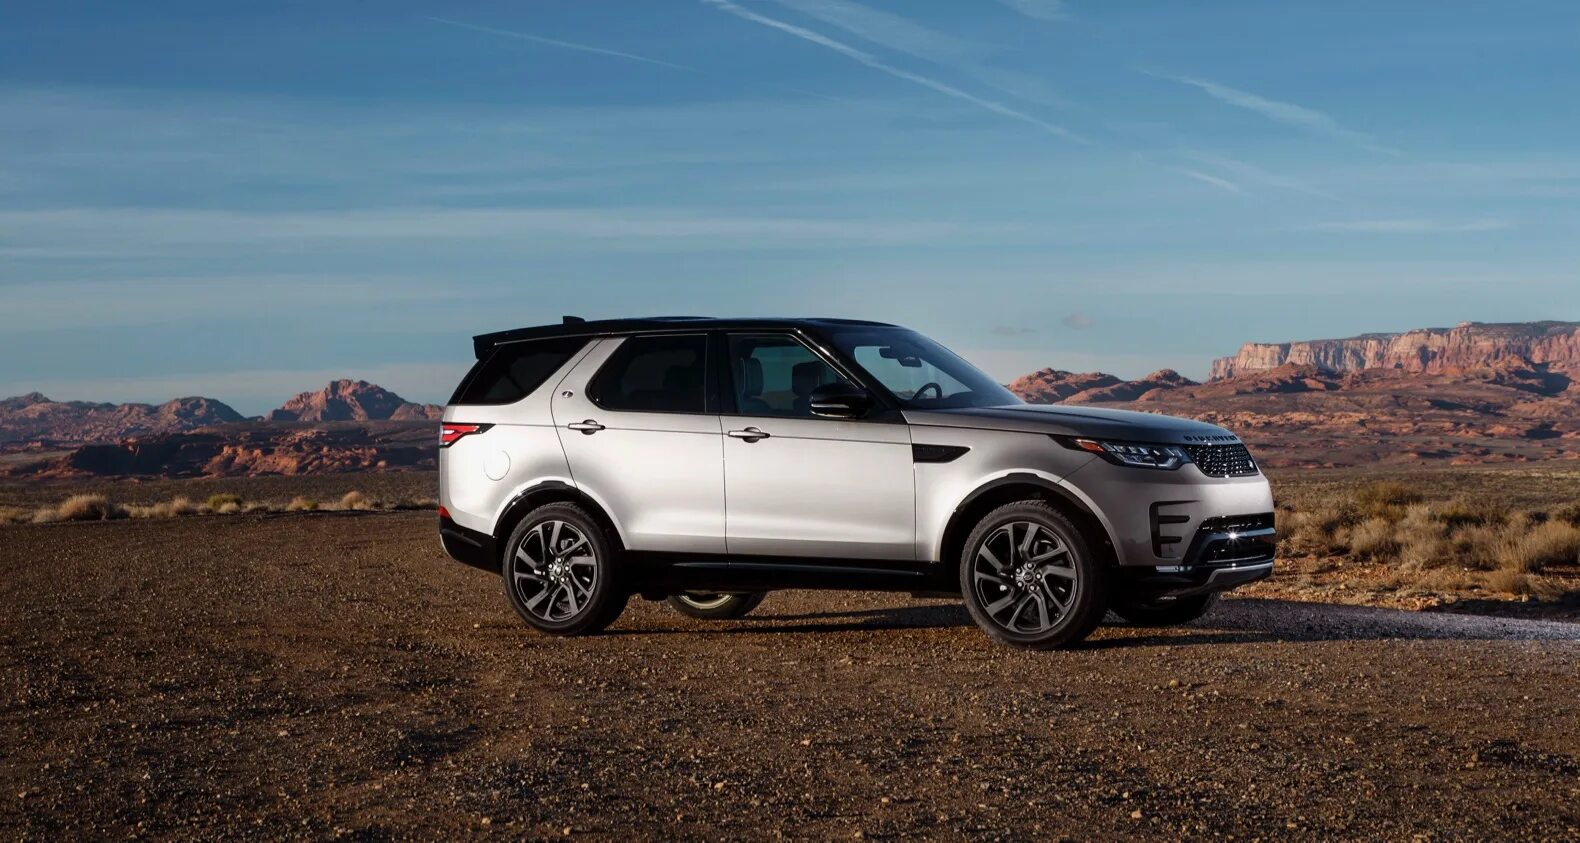 Range Rover Discovery 2023. Land Rover Discovery 2019. Рендж Ровер Дискавери 2019. Лендровер Дискавери 2023 SV. Ленд ровер дискавери 2019